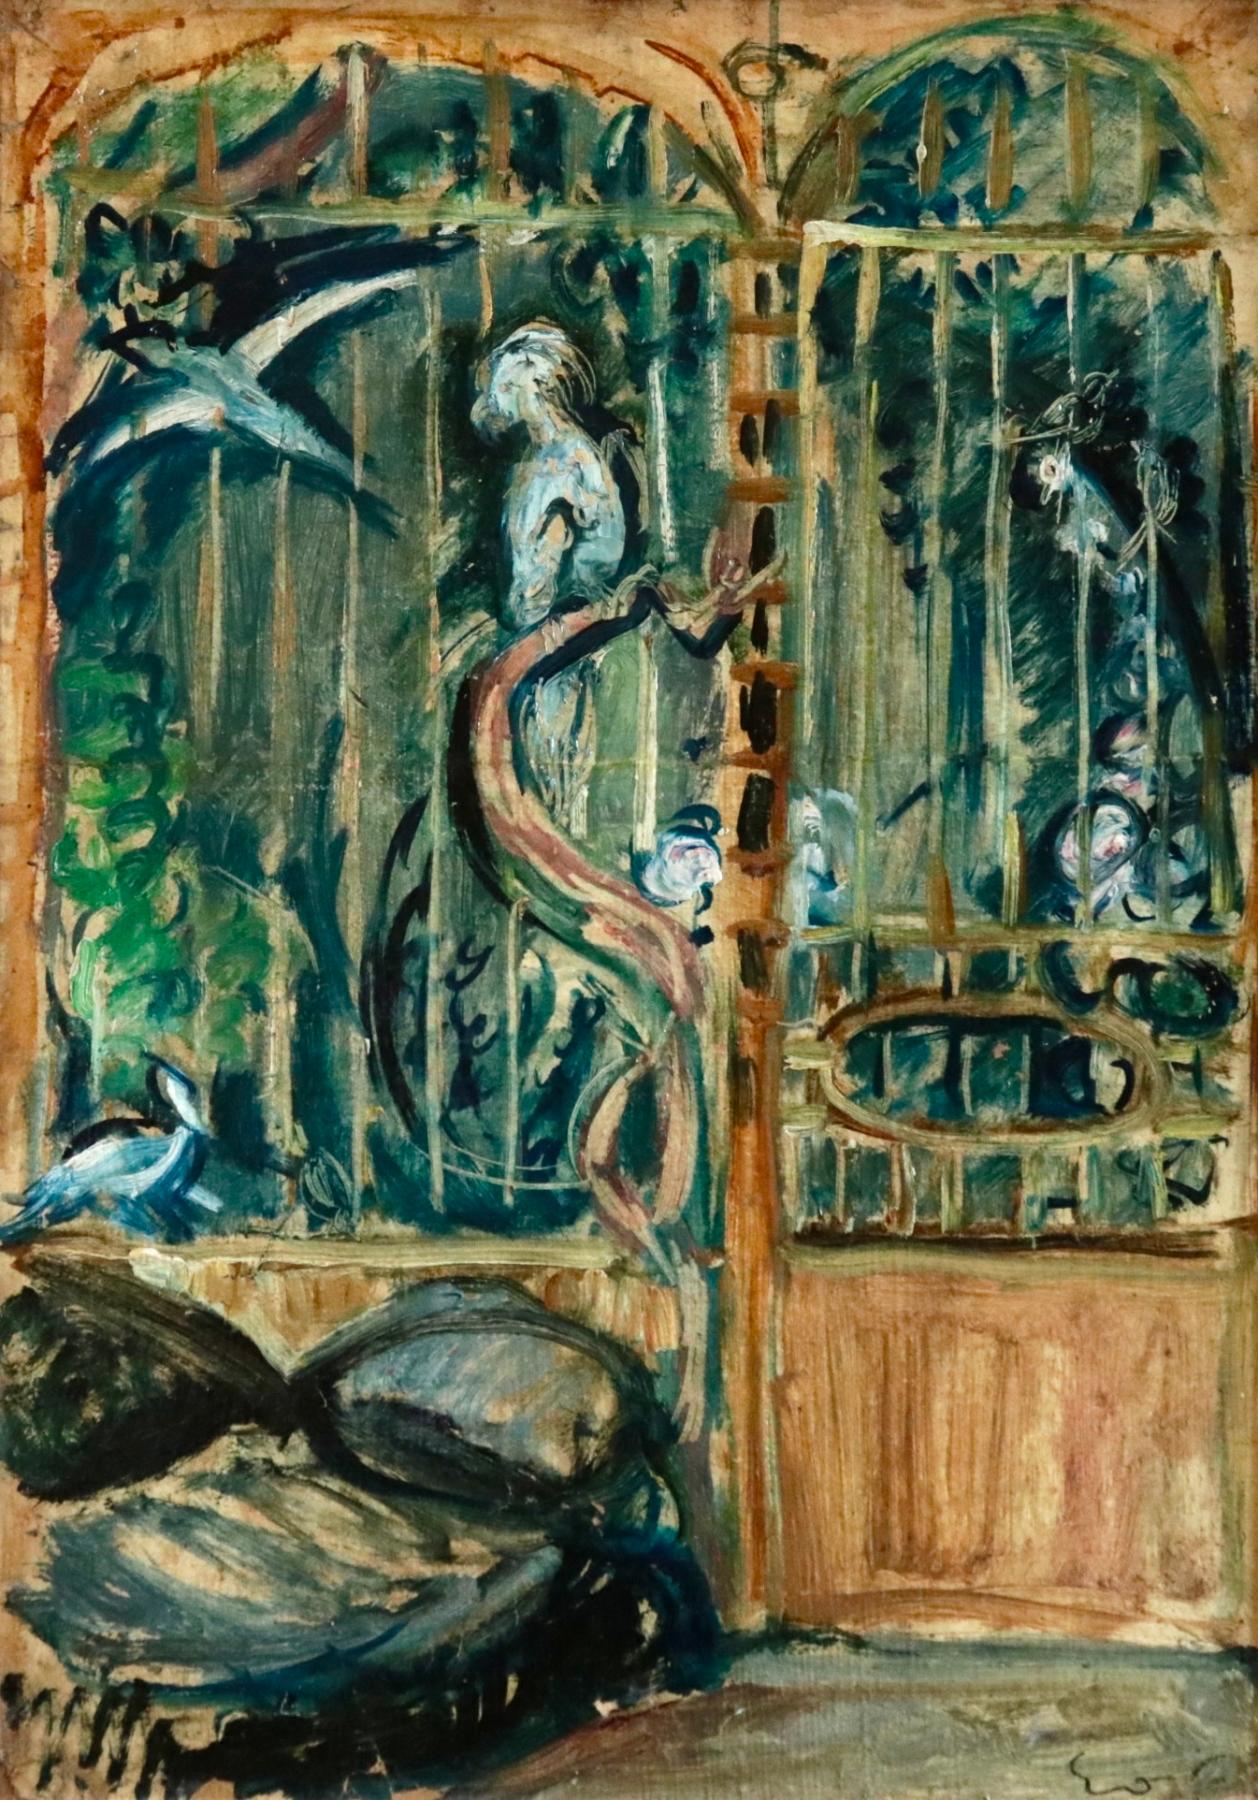 The Aviary - 20th Century Post Impressionist Oil, Exotic Birds by Othon Friesz - Painting by Achille-Émile Othon Friesz